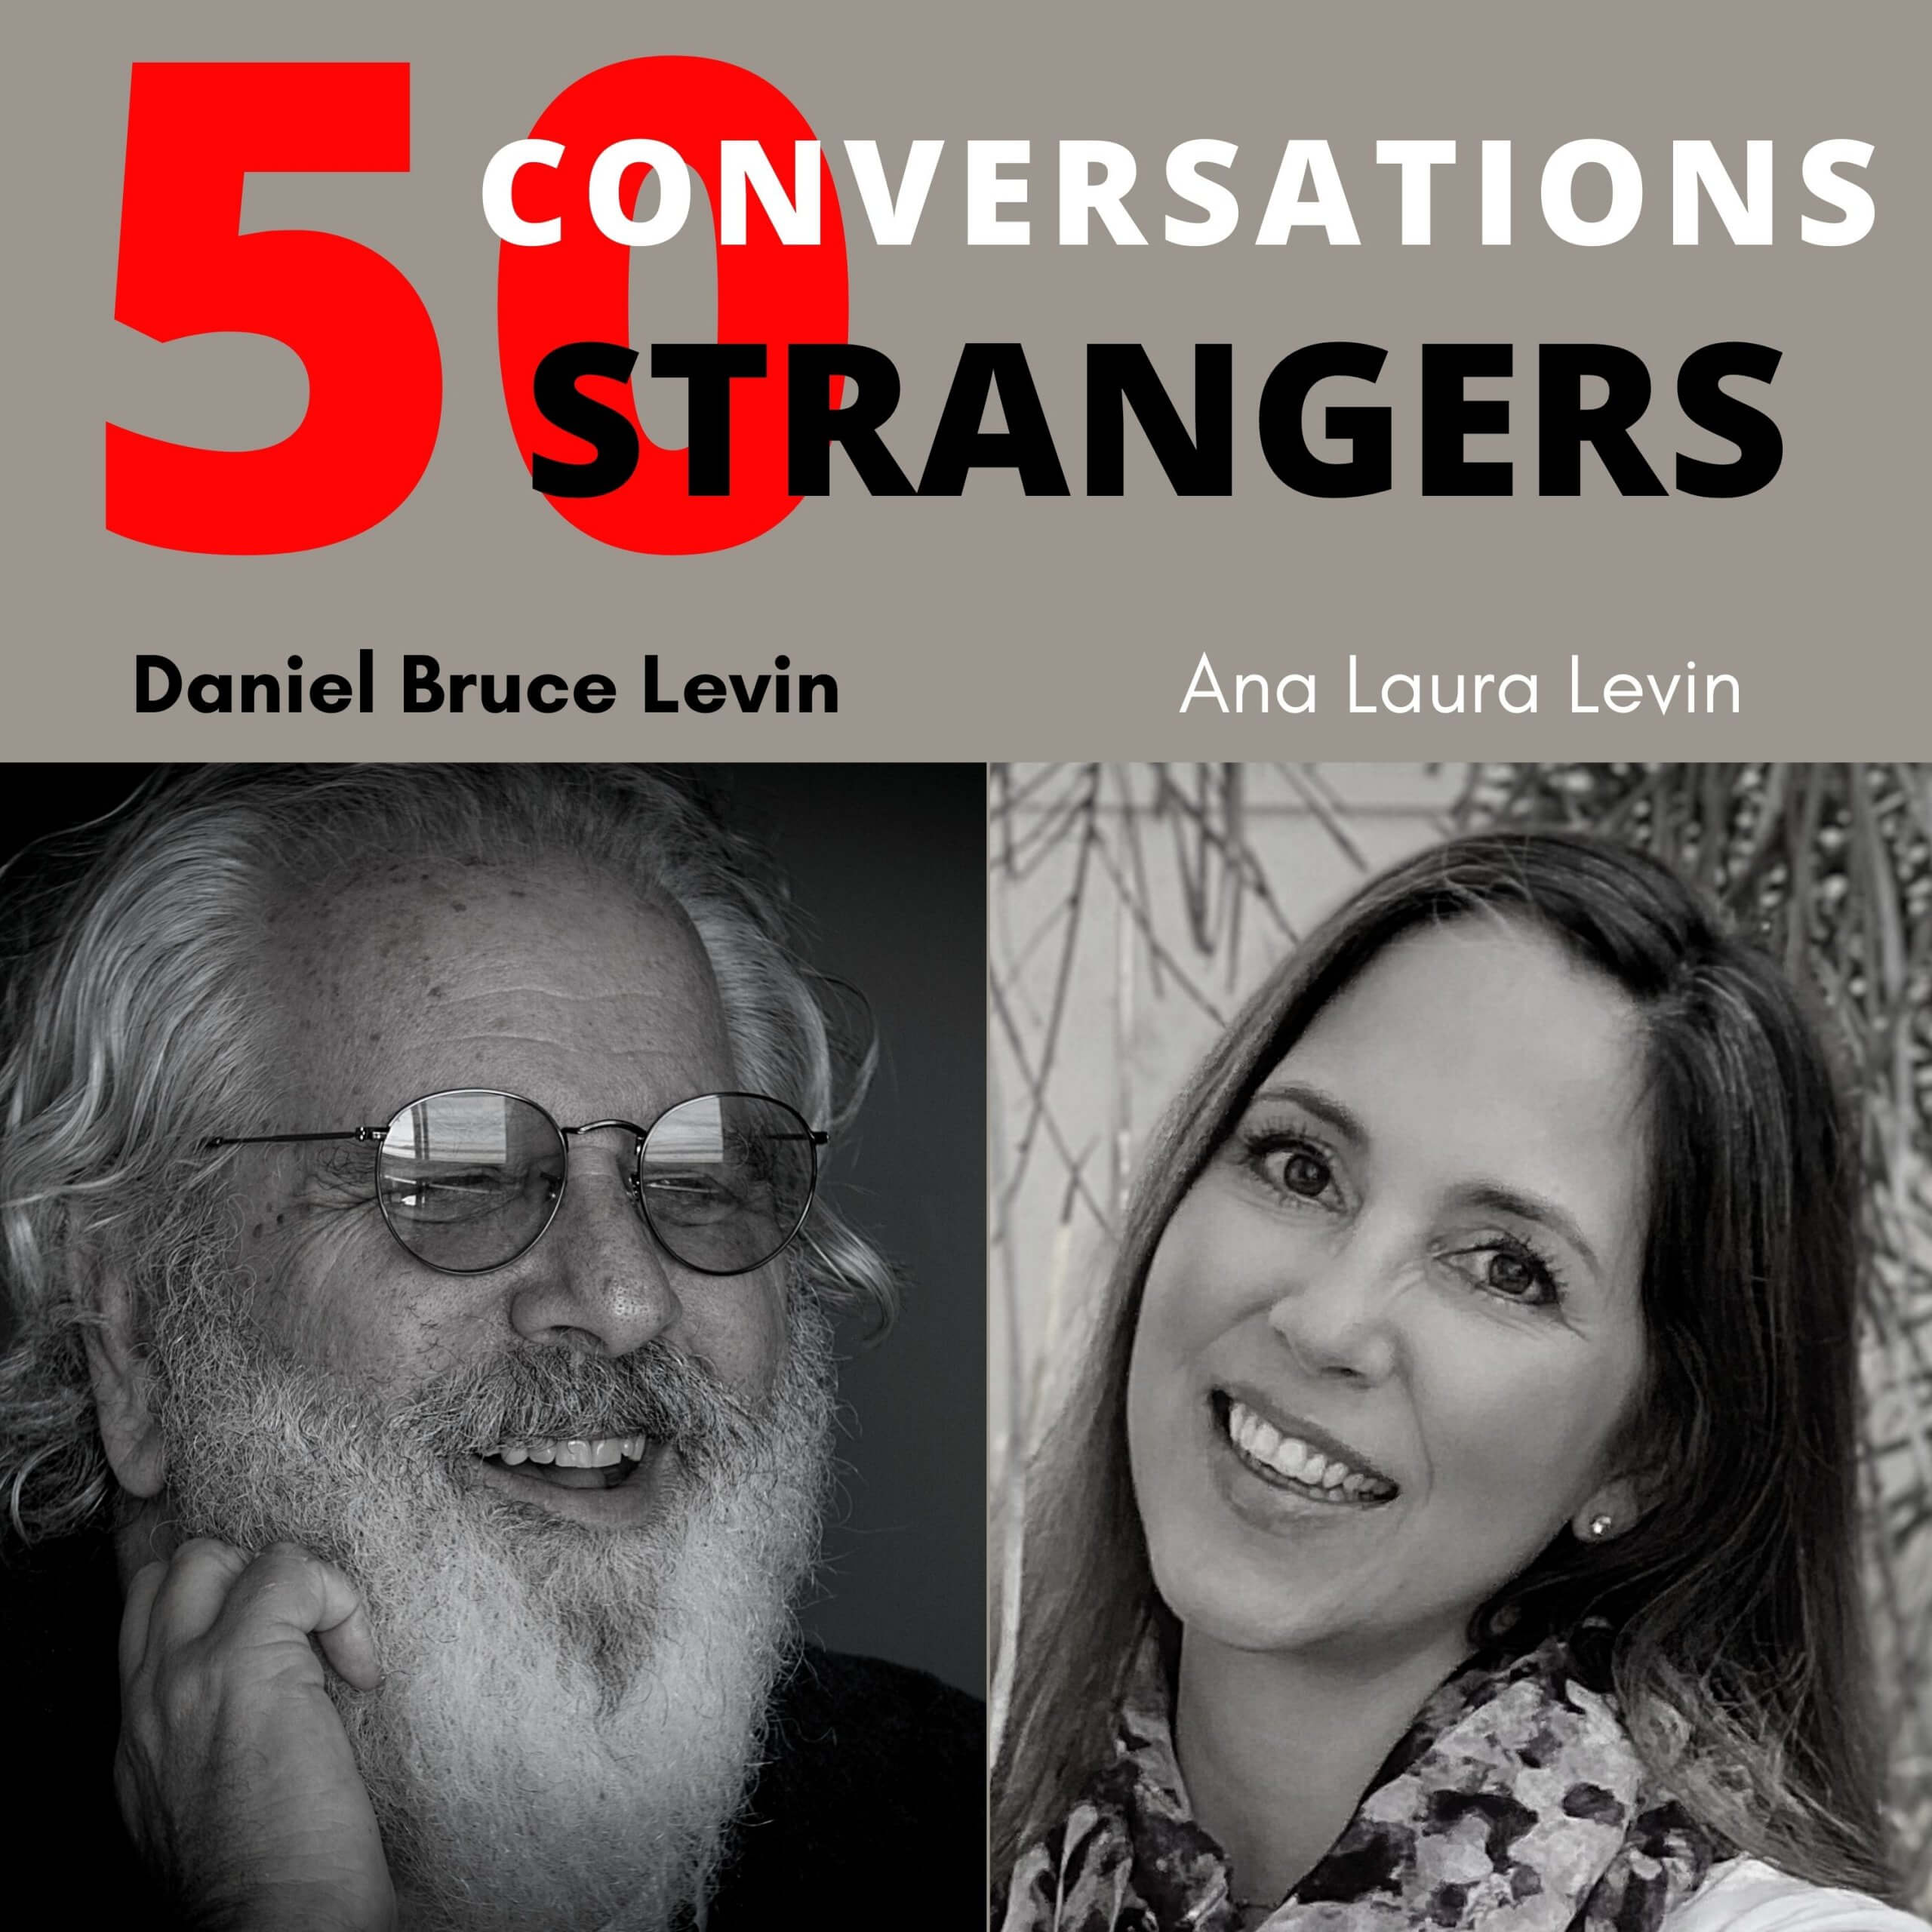 50 Conversations with 50 Strangers with my wife Ana Laura Levin